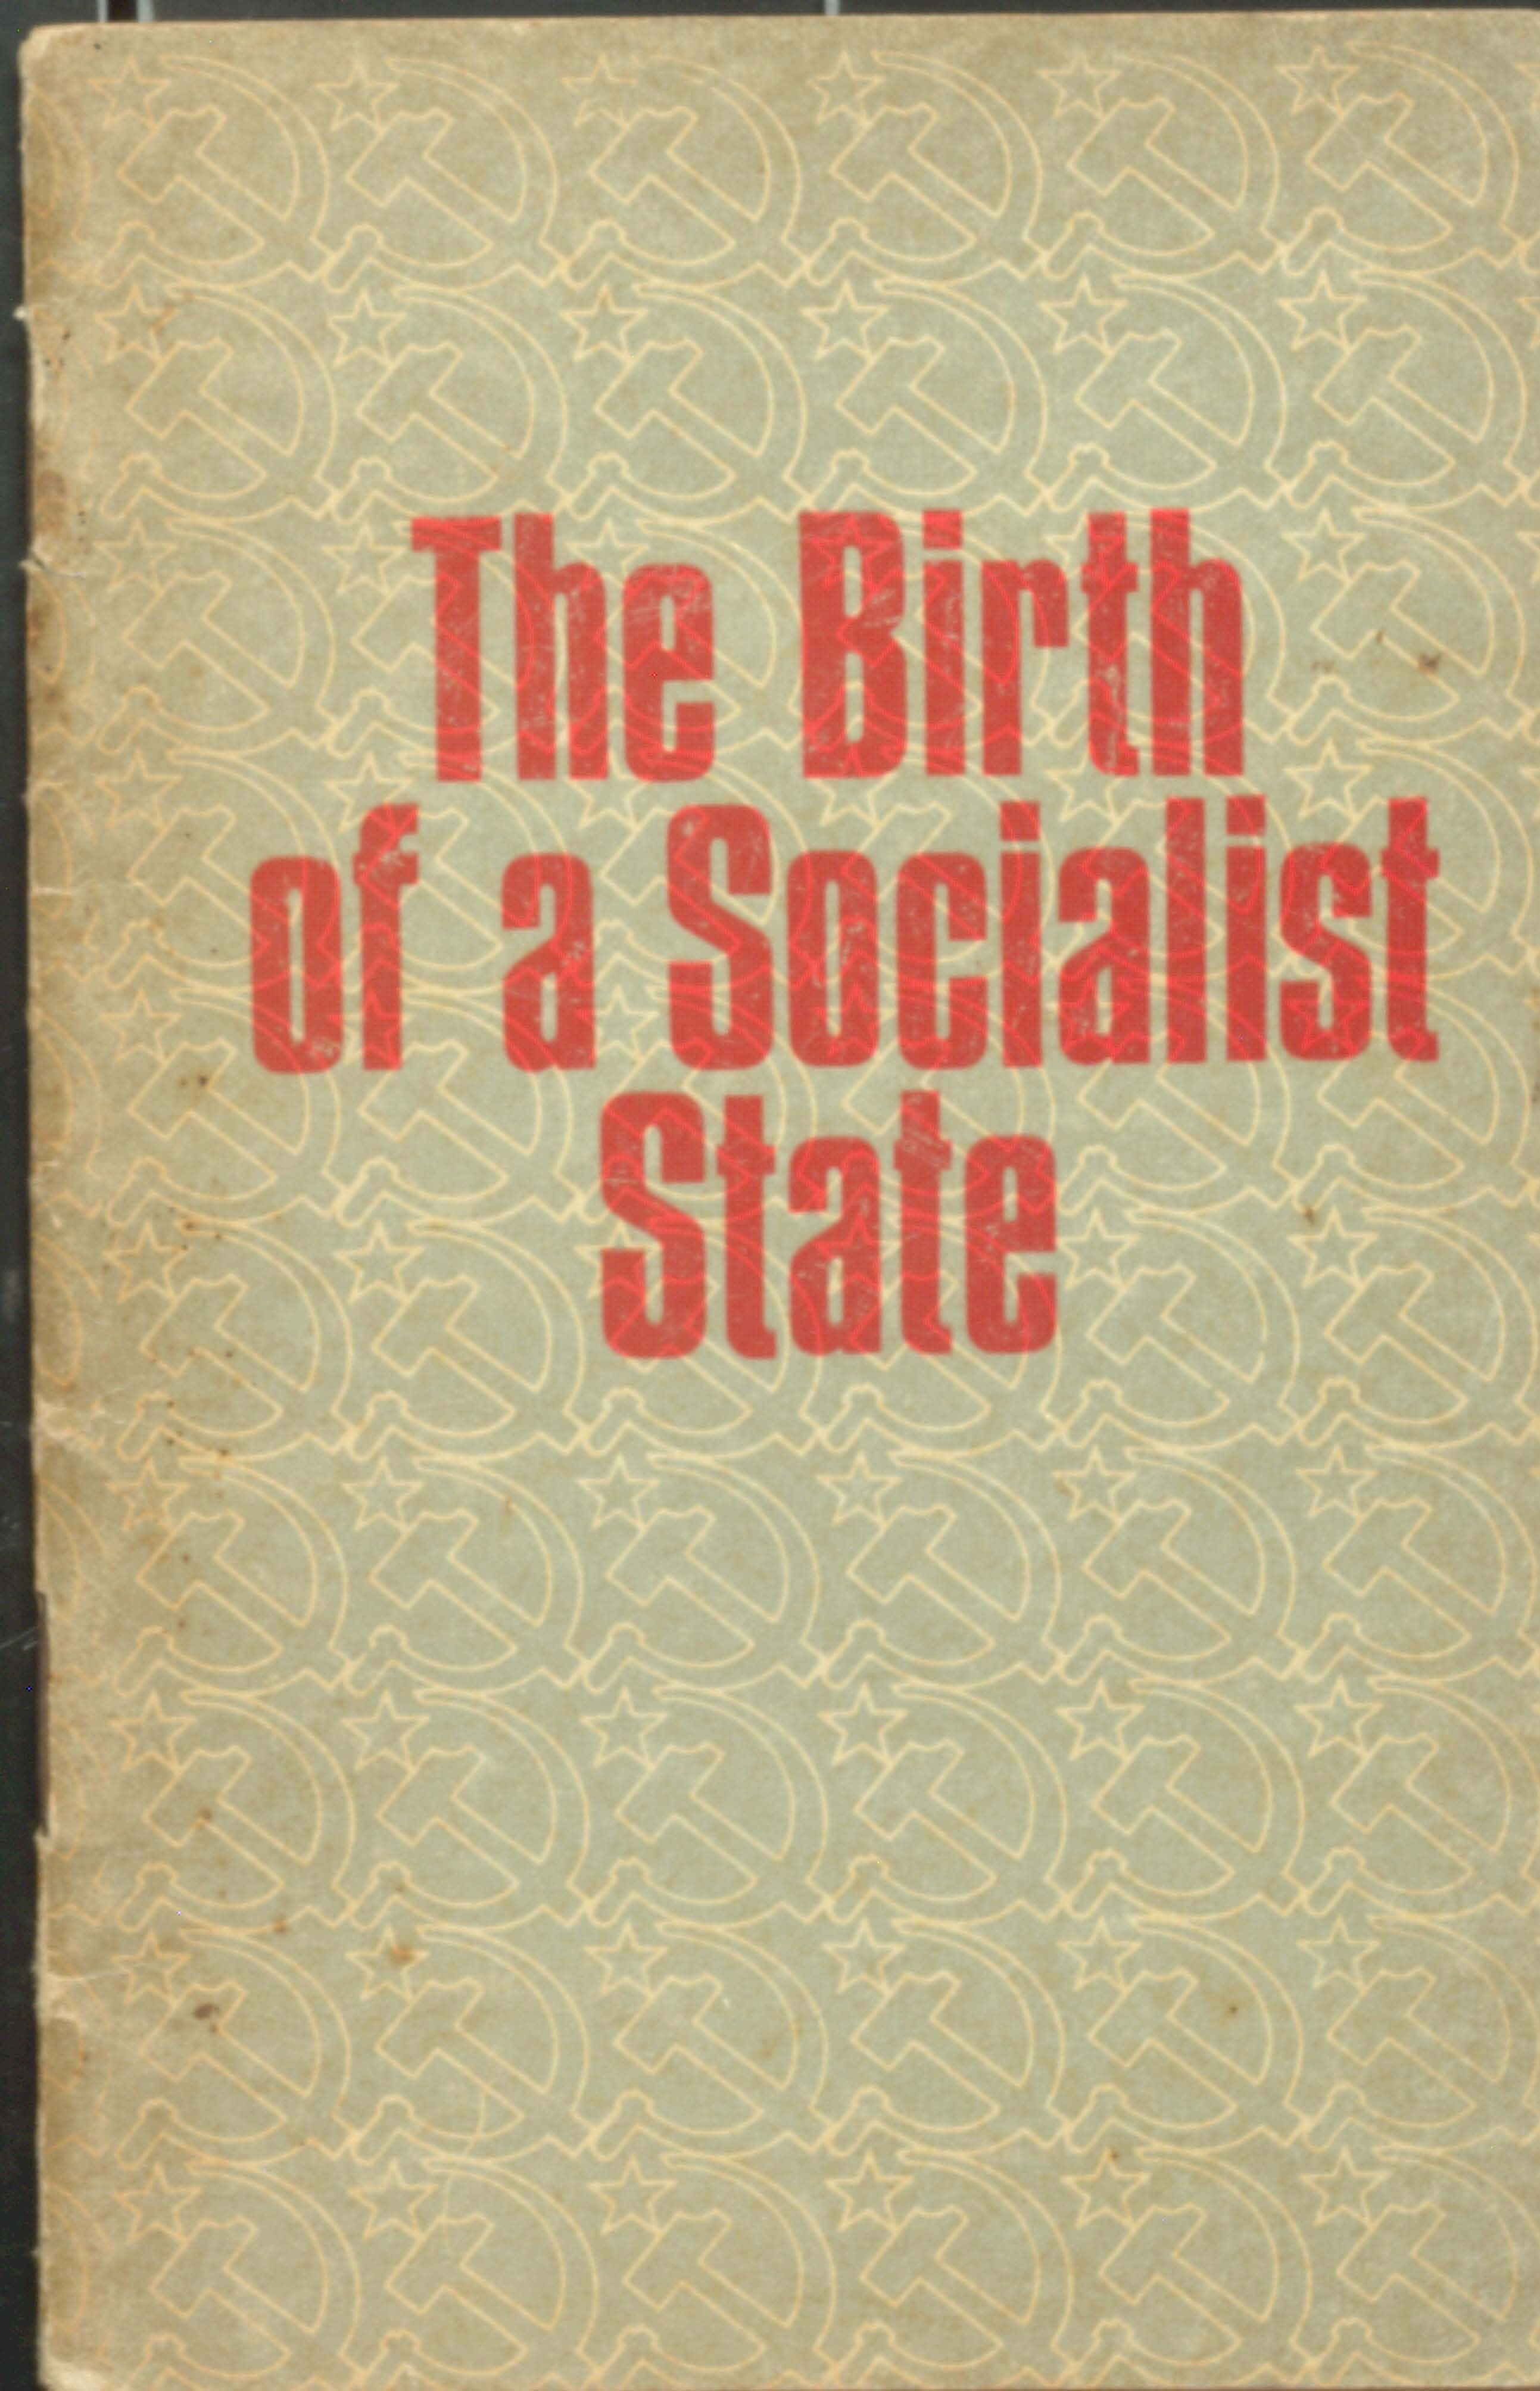 The Birth Of Socialist State